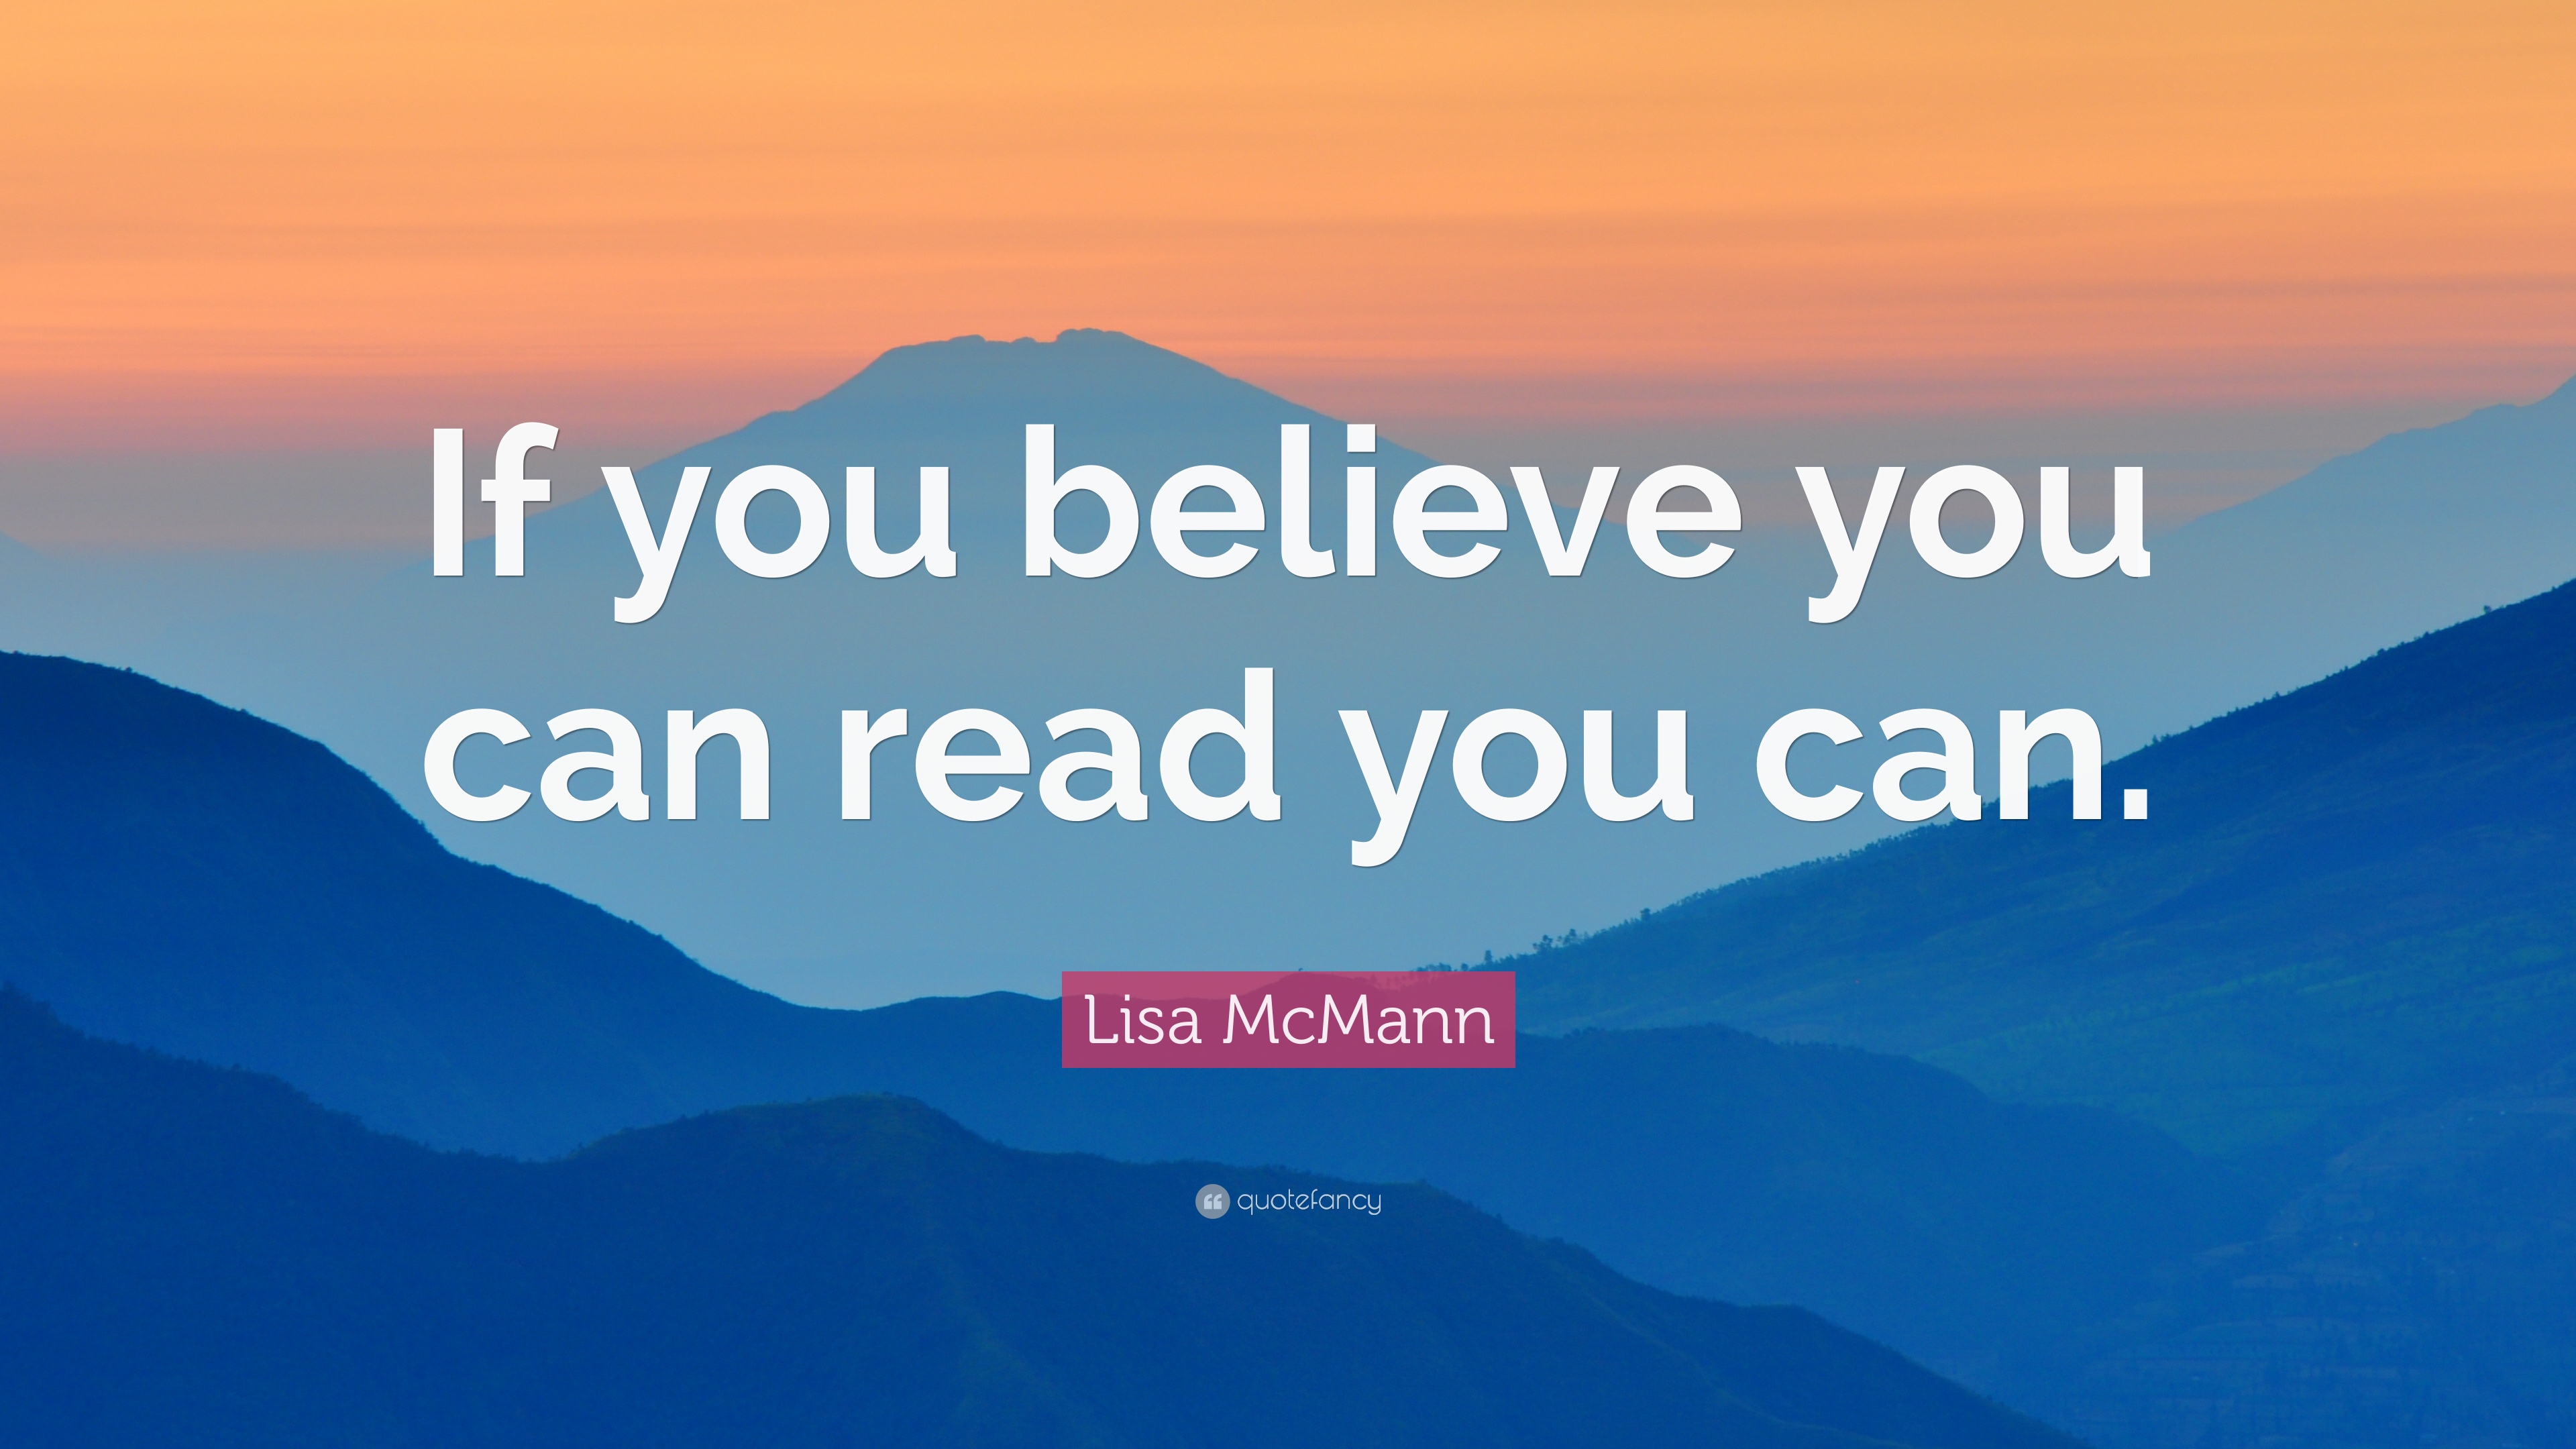 Lisa McMann Quote: “If you believe you can read you can.” 7